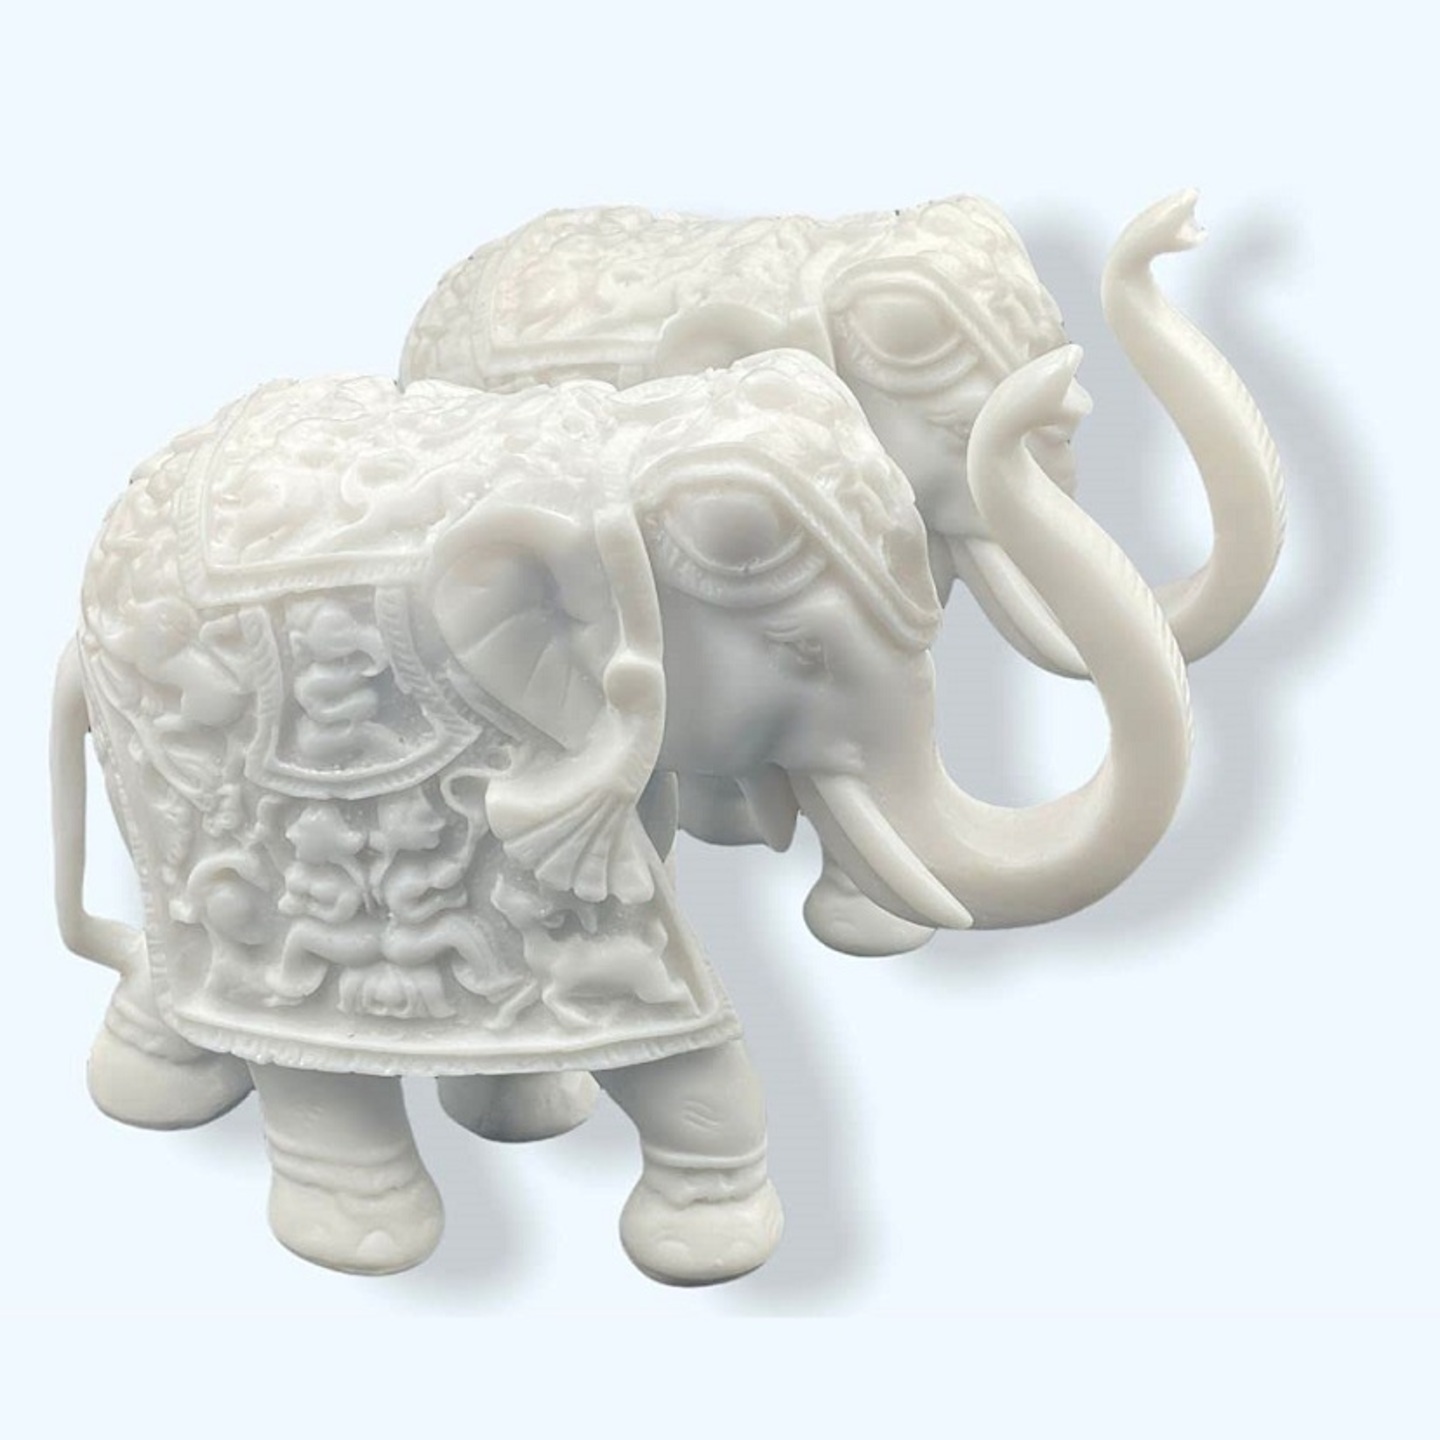 Antique Finish Pure Marble Trunk up Elephant / Standing / Handicraft Idol for Home Decor (4.2 Inch) - Set of 2